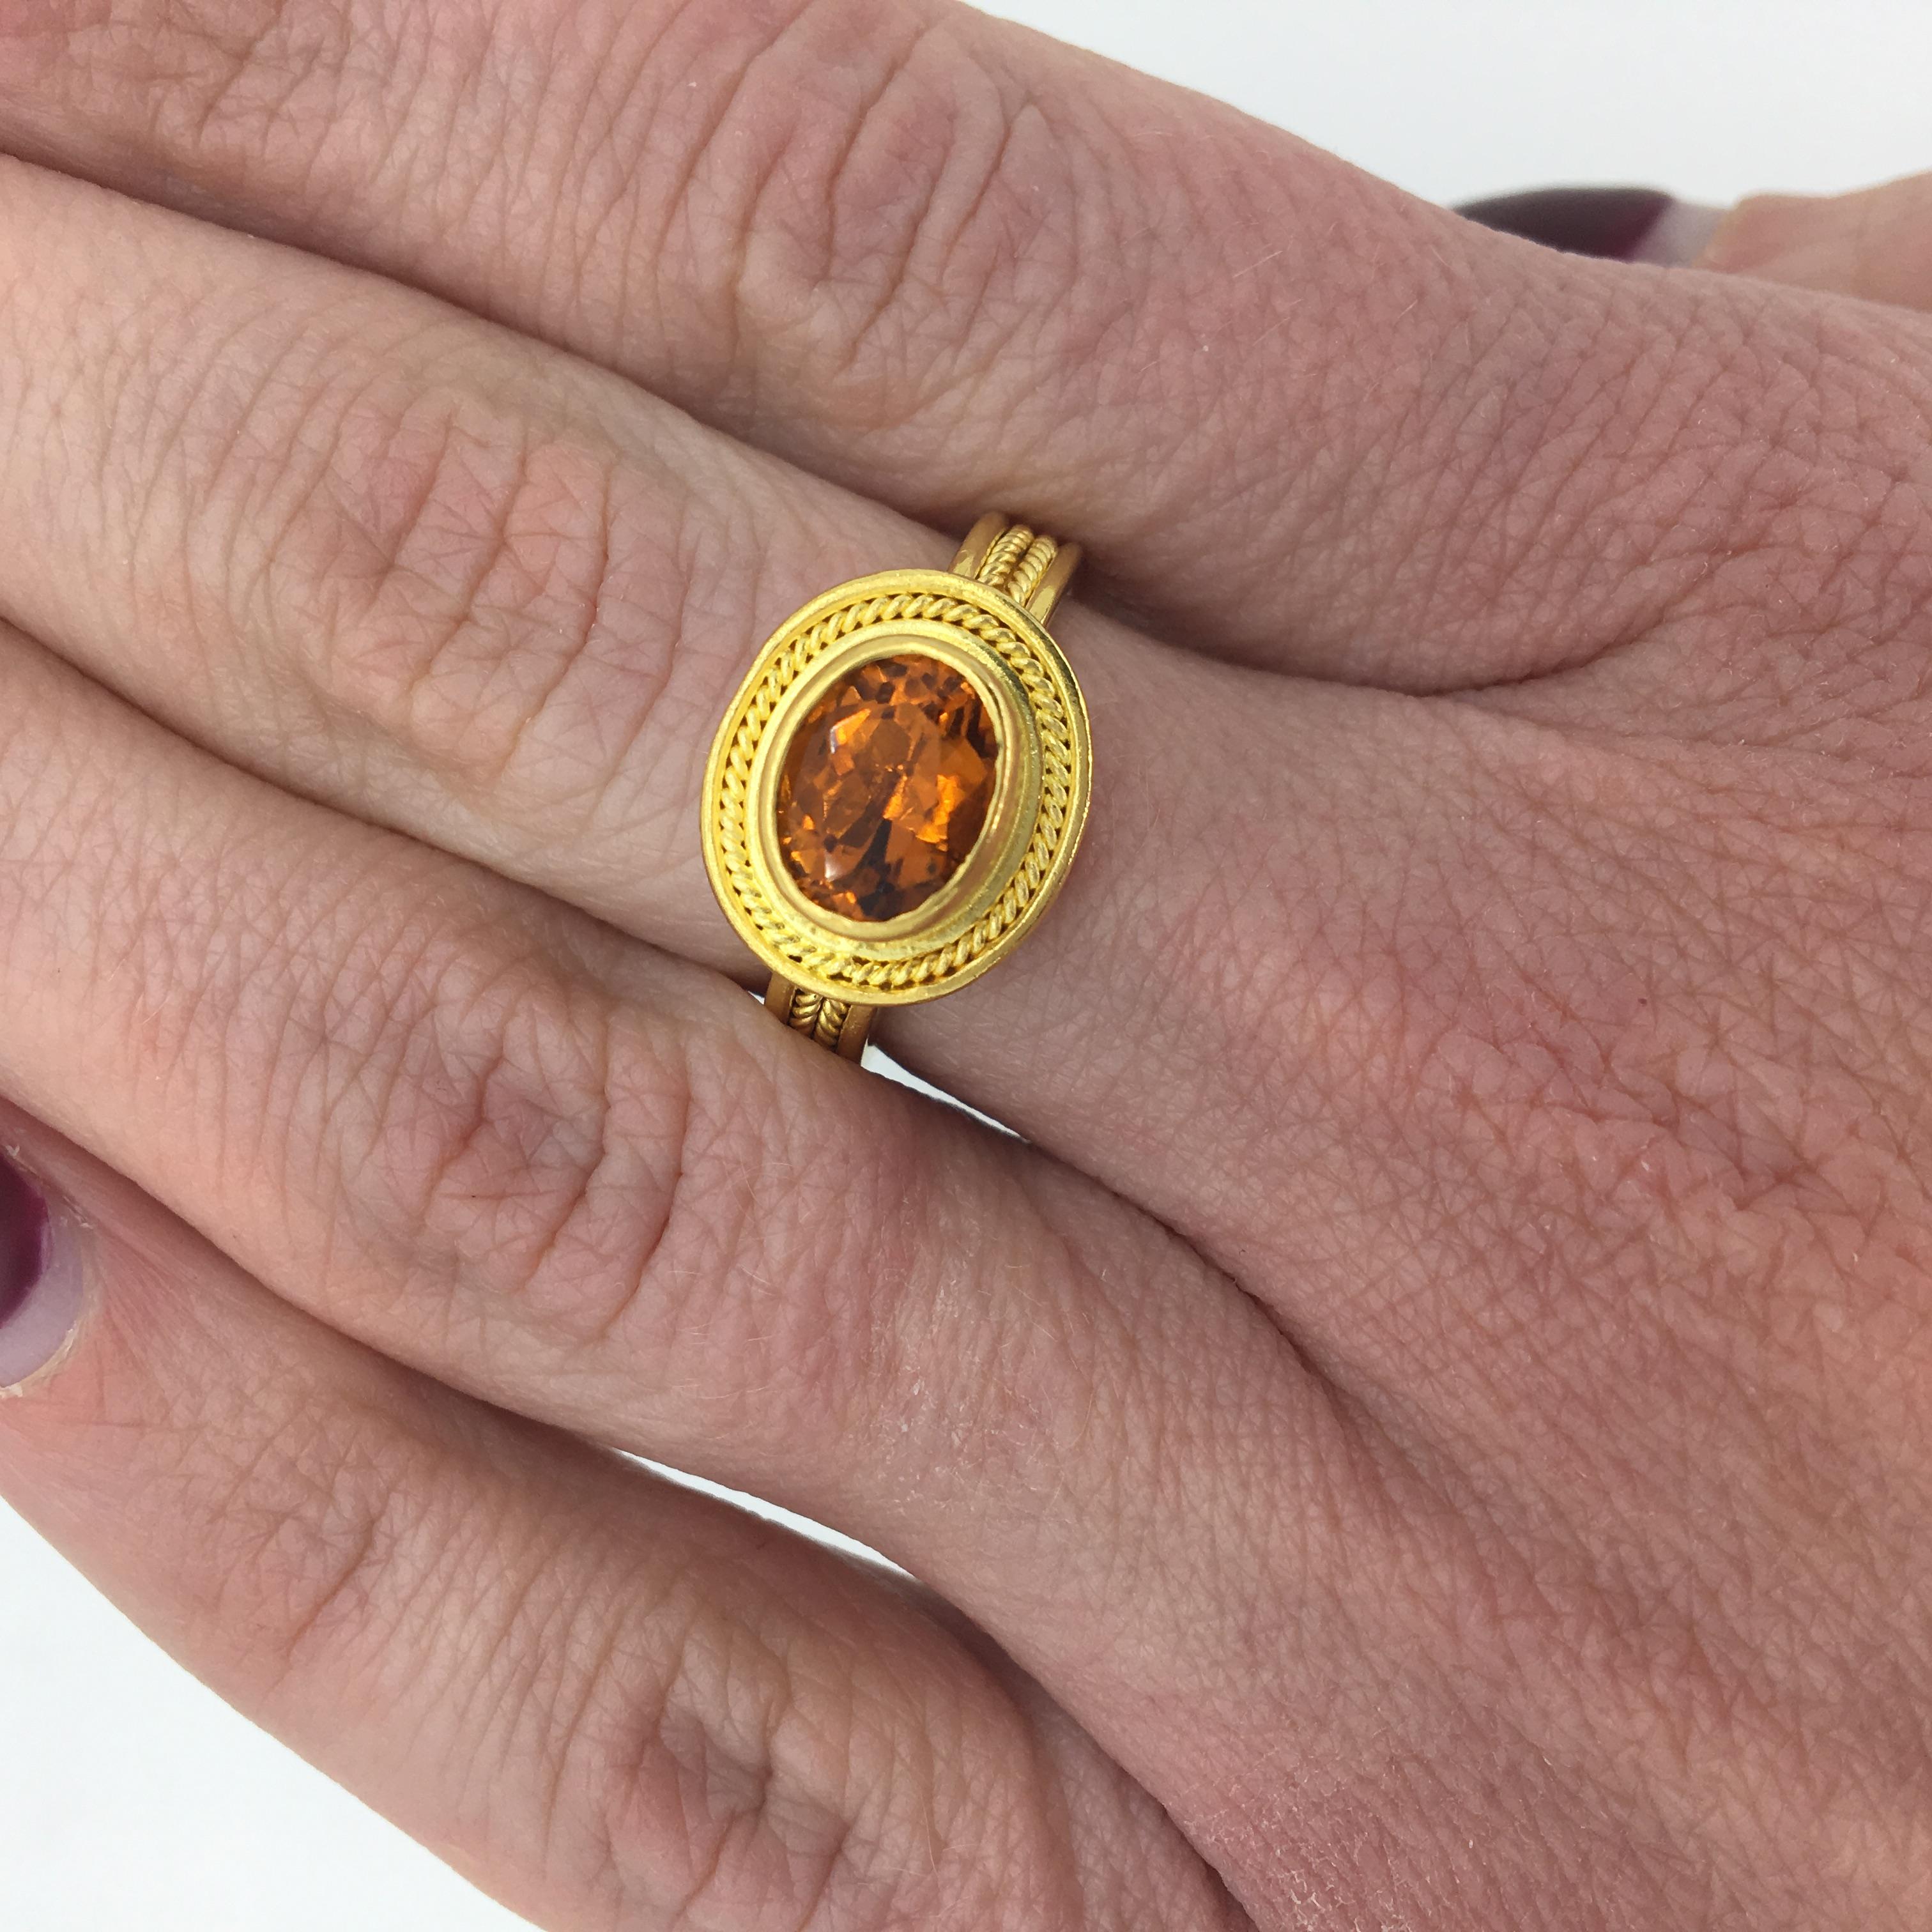 Stunning 22K yellow gold designer Maija Neimanis ring with a beautiful rope designed bezel and shank.

Designer: Maija Neimanis
Gemstone: Oval Cut Citrine
Gemstone Carat Weight: Approximately 6.11x8.22
Metal: 22K Yellow Gold
Ring Size: